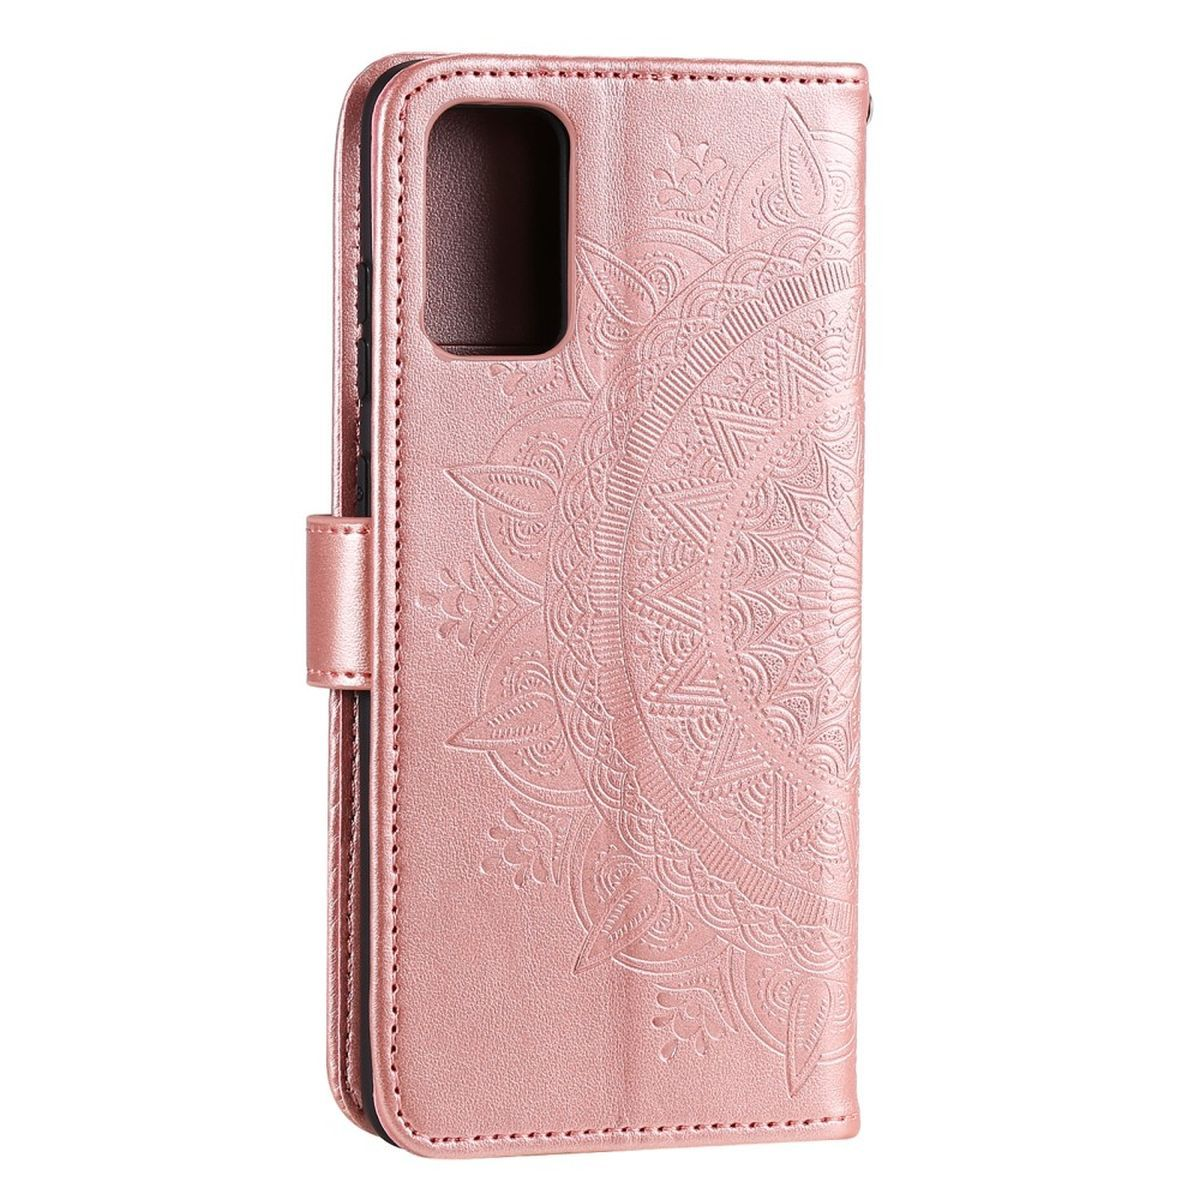 COVERKINGZ Klapphülle mit Mandala Muster, 5G, Galaxy Samsung, Bookcover, Rosegold M23